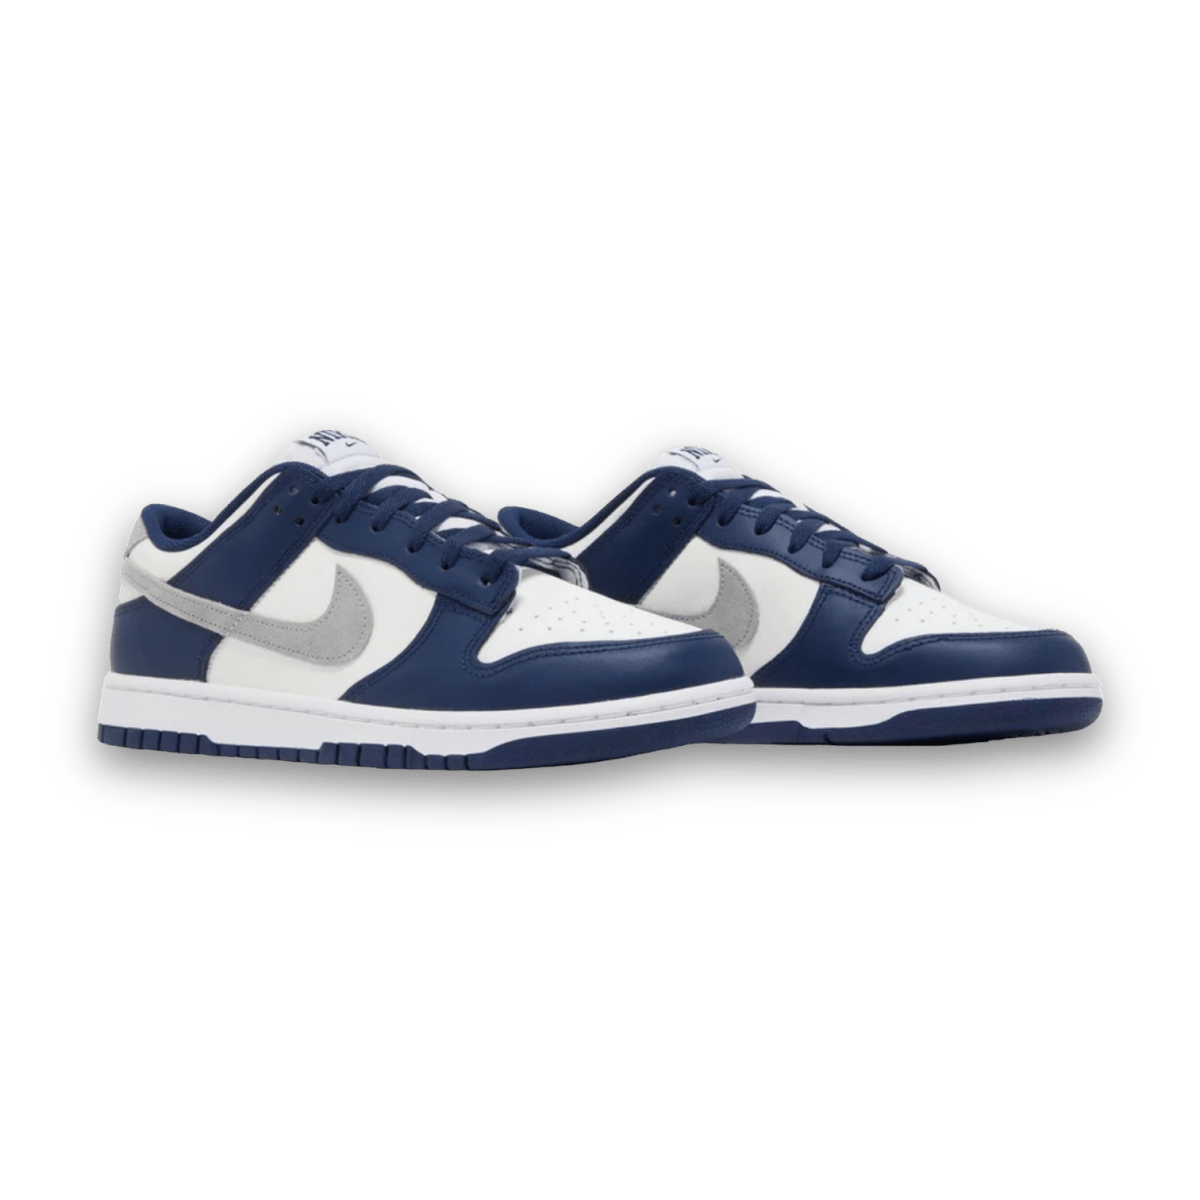 Laces for Lions Dunk Low 'Midnight Navy Smoke Grey' - Low Sneaker - Jawns on Fire Sneakers & Streetwear